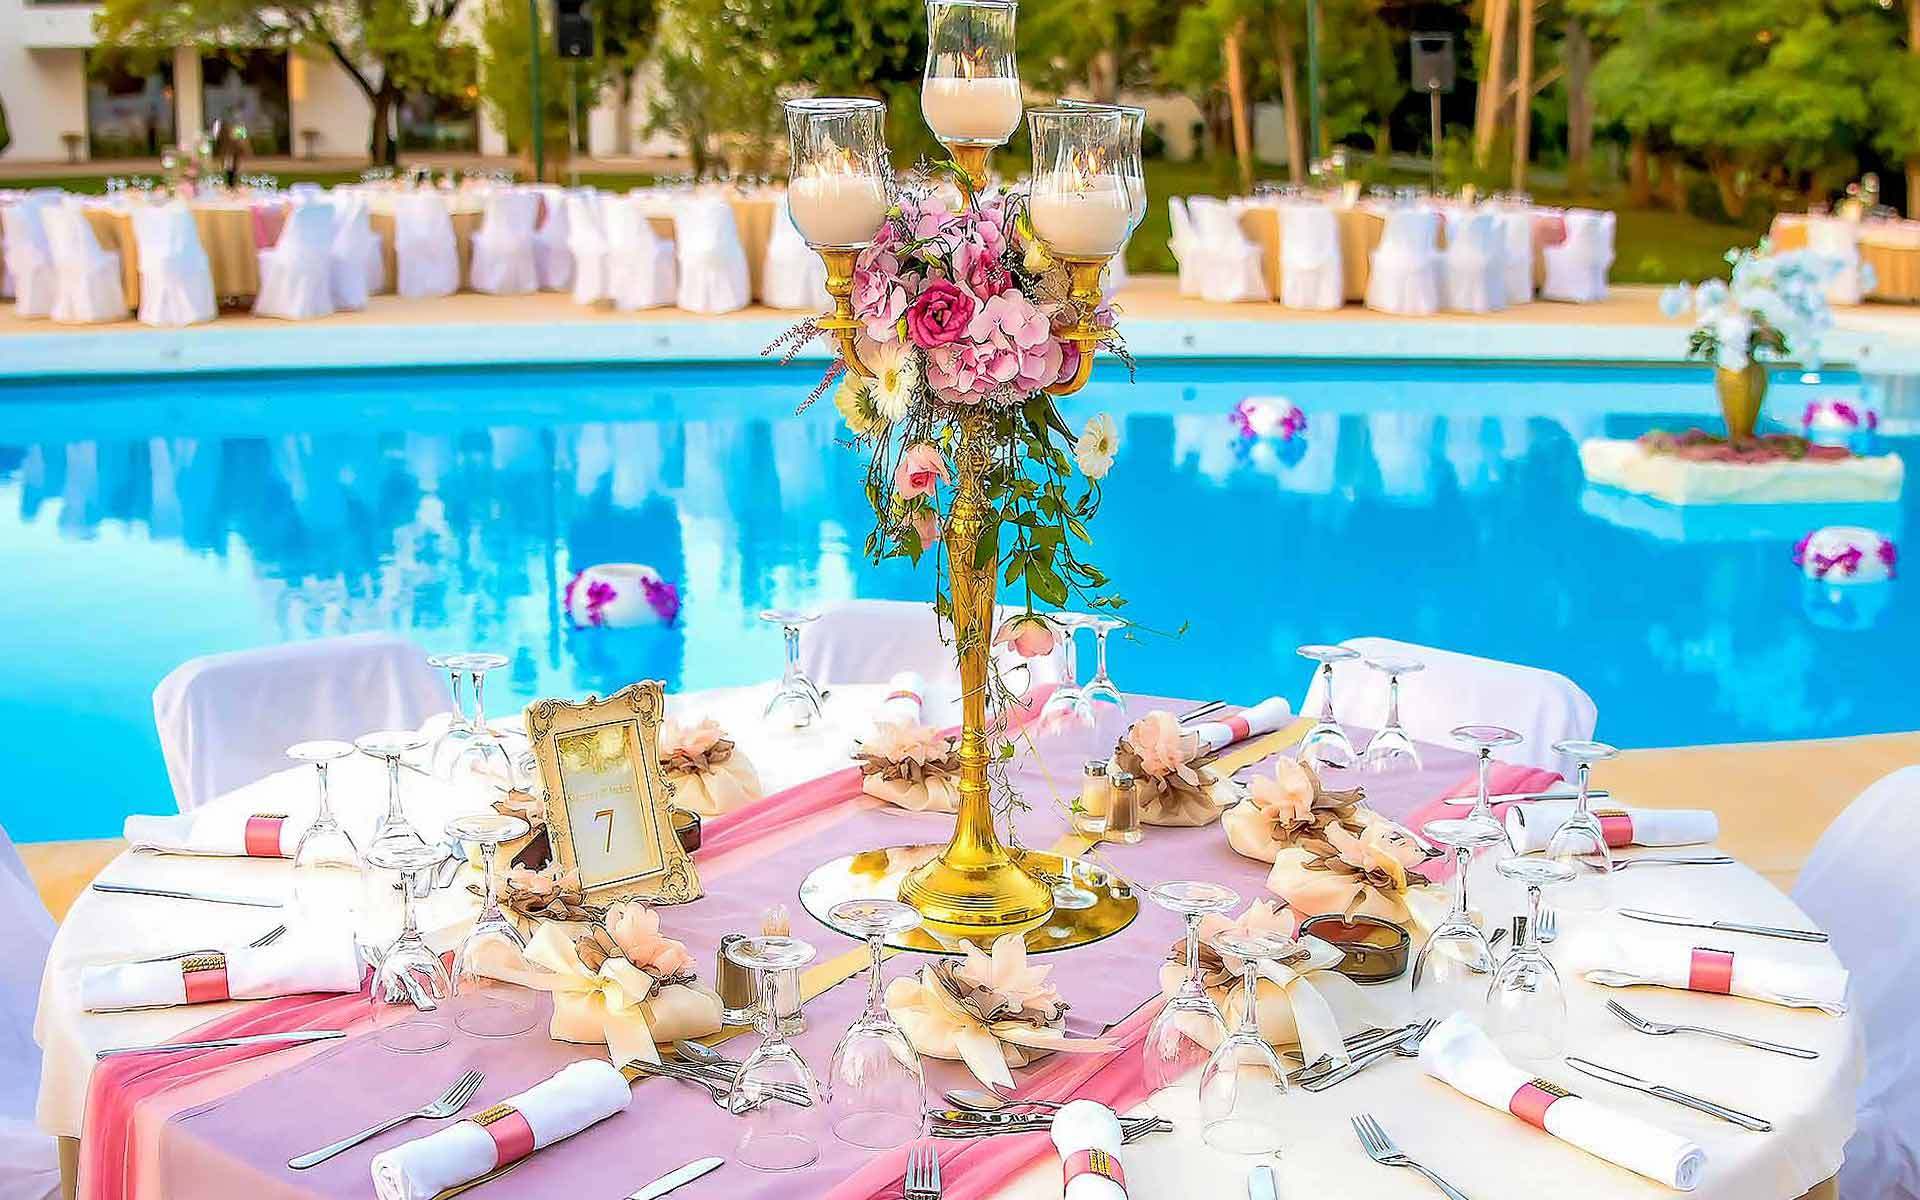 Gold candlestick centerpiece in pastel colors by Rogdaki Events Trademark